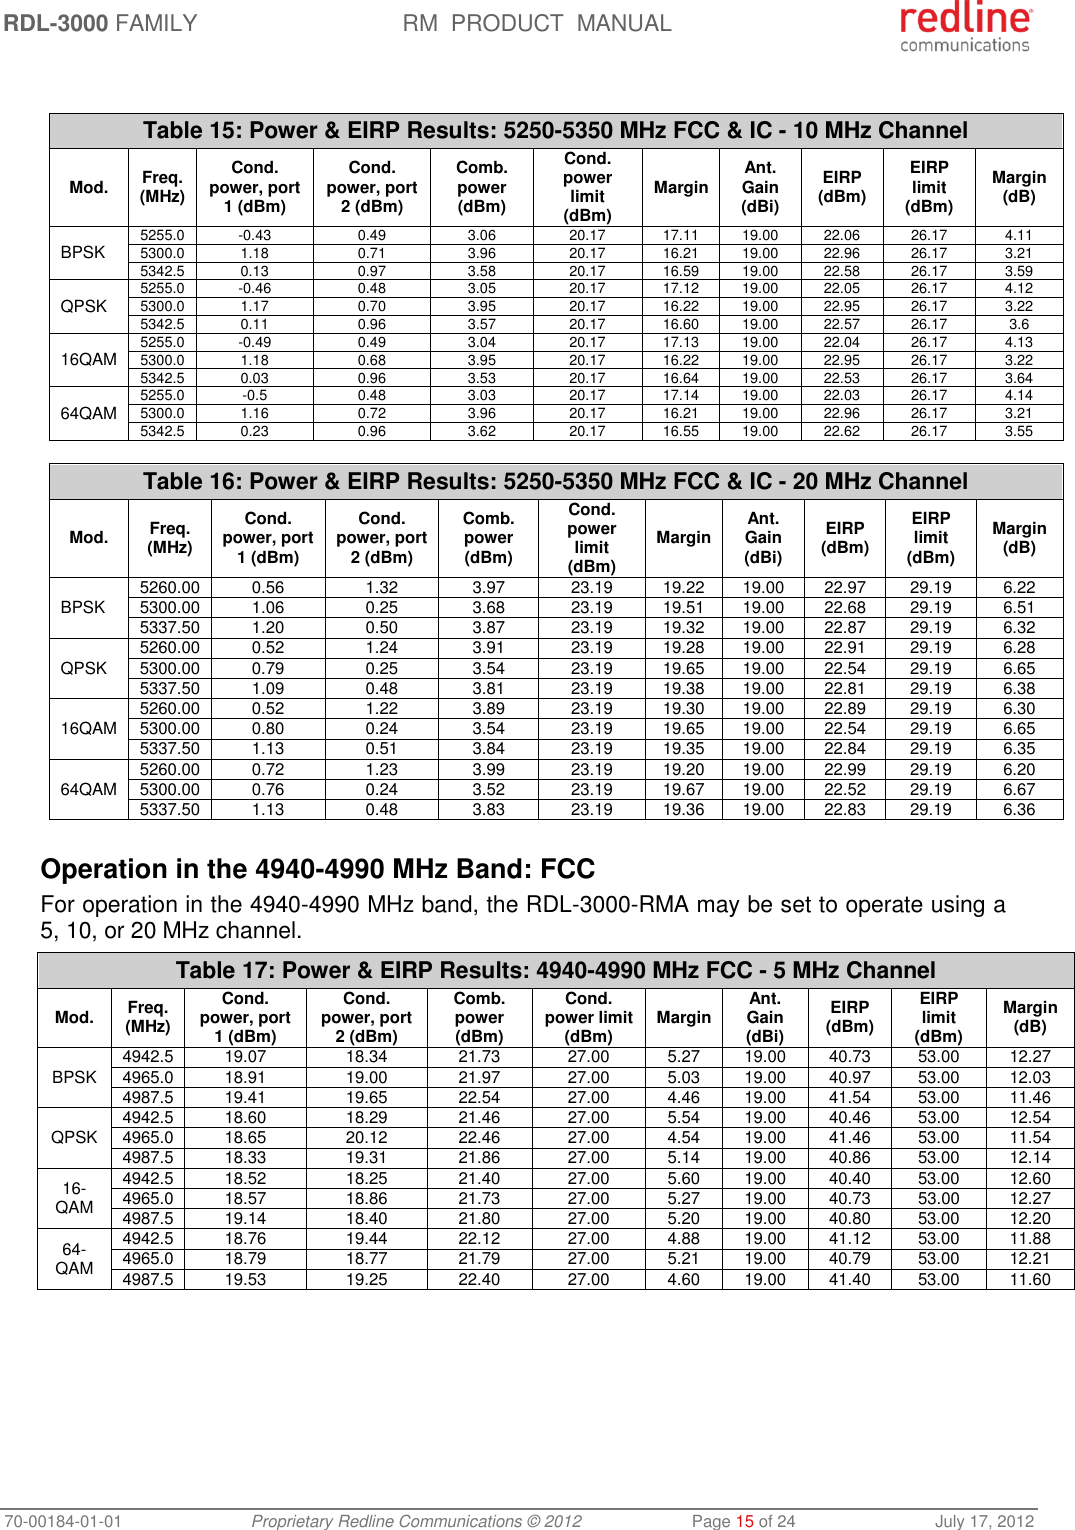 RDL-3000 FAMILY RM  PRODUCT  MANUAL 70-00184-01-01 Proprietary Redline Communications © 2012  Page 15 of 24  July 17, 2012   Table 15: Power &amp; EIRP Results: 5250-5350 MHz FCC &amp; IC - 10 MHz Channel Mod. Freq. (MHz) Cond. power, port 1 (dBm) Cond. power, port 2 (dBm) Comb. power (dBm) Cond. power limit (dBm) Margin Ant. Gain (dBi) EIRP (dBm) EIRP limit (dBm) Margin (dB) BPSK  5255.0 -0.43 0.49 3.06 20.17 17.11 19.00 22.06 26.17 4.11 5300.0 1.18 0.71 3.96 20.17 16.21 19.00 22.96 26.17 3.21 5342.5 0.13 0.97 3.58 20.17 16.59 19.00 22.58 26.17 3.59 QPSK 5255.0 -0.46 0.48 3.05 20.17 17.12 19.00 22.05 26.17 4.12 5300.0 1.17 0.70 3.95 20.17 16.22 19.00 22.95 26.17 3.22 5342.5 0.11 0.96 3.57 20.17 16.60 19.00 22.57 26.17 3.6 16QAM 5255.0 -0.49 0.49 3.04 20.17 17.13 19.00 22.04 26.17 4.13 5300.0 1.18 0.68 3.95 20.17 16.22 19.00 22.95 26.17 3.22 5342.5 0.03 0.96 3.53 20.17 16.64 19.00 22.53 26.17 3.64 64QAM 5255.0 -0.5 0.48 3.03 20.17 17.14 19.00 22.03 26.17 4.14 5300.0 1.16 0.72 3.96 20.17 16.21 19.00 22.96 26.17 3.21 5342.5 0.23 0.96 3.62 20.17 16.55 19.00 22.62 26.17 3.55  Table 16: Power &amp; EIRP Results: 5250-5350 MHz FCC &amp; IC - 20 MHz Channel Mod. Freq. (MHz) Cond. power, port 1 (dBm) Cond. power, port 2 (dBm) Comb. power (dBm) Cond. power limit (dBm) Margin Ant. Gain (dBi) EIRP (dBm) EIRP limit (dBm) Margin (dB) BPSK  5260.00 0.56 1.32 3.97 23.19 19.22 19.00 22.97 29.19 6.22 5300.00 1.06 0.25 3.68 23.19 19.51 19.00 22.68 29.19 6.51 5337.50 1.20 0.50 3.87 23.19 19.32 19.00 22.87 29.19 6.32 QPSK 5260.00 0.52 1.24 3.91 23.19 19.28 19.00 22.91 29.19 6.28 5300.00 0.79 0.25 3.54 23.19 19.65 19.00 22.54 29.19 6.65 5337.50 1.09 0.48 3.81 23.19 19.38 19.00 22.81 29.19 6.38 16QAM 5260.00 0.52 1.22 3.89 23.19 19.30 19.00 22.89 29.19 6.30 5300.00 0.80 0.24 3.54 23.19 19.65 19.00 22.54 29.19 6.65 5337.50 1.13 0.51 3.84 23.19 19.35 19.00 22.84 29.19 6.35 64QAM 5260.00 0.72 1.23 3.99 23.19 19.20 19.00 22.99 29.19 6.20 5300.00 0.76 0.24 3.52 23.19 19.67 19.00 22.52 29.19 6.67 5337.50 1.13 0.48 3.83 23.19 19.36 19.00 22.83 29.19 6.36   Operation in the 4940-4990 MHz Band: FCC For operation in the 4940-4990 MHz band, the RDL-3000-RMA may be set to operate using a 5, 10, or 20 MHz channel. Table 17: Power &amp; EIRP Results: 4940-4990 MHz FCC - 5 MHz Channel Mod. Freq. (MHz) Cond. power, port 1 (dBm) Cond. power, port 2 (dBm) Comb. power (dBm) Cond. power limit (dBm) Margin Ant. Gain (dBi) EIRP (dBm) EIRP limit (dBm) Margin (dB) BPSK   4942.5 19.07 18.34 21.73 27.00 5.27 19.00 40.73 53.00 12.27 4965.0 18.91 19.00 21.97 27.00 5.03 19.00 40.97 53.00 12.03 4987.5 19.41 19.65 22.54 27.00 4.46 19.00 41.54 53.00 11.46 QPSK  4942.5 18.60 18.29 21.46 27.00 5.54 19.00 40.46 53.00 12.54 4965.0 18.65 20.12 22.46 27.00 4.54 19.00 41.46 53.00 11.54 4987.5 18.33 19.31 21.86 27.00 5.14 19.00 40.86 53.00 12.14 16-QAM  4942.5 18.52 18.25 21.40 27.00 5.60 19.00 40.40 53.00 12.60 4965.0 18.57 18.86 21.73 27.00 5.27 19.00 40.73 53.00 12.27 4987.5 19.14 18.40 21.80 27.00 5.20 19.00 40.80 53.00 12.20 64-QAM  4942.5 18.76 19.44 22.12 27.00 4.88 19.00 41.12 53.00 11.88 4965.0 18.79 18.77 21.79 27.00 5.21 19.00 40.79 53.00 12.21 4987.5 19.53 19.25 22.40 27.00 4.60 19.00 41.40 53.00 11.60  